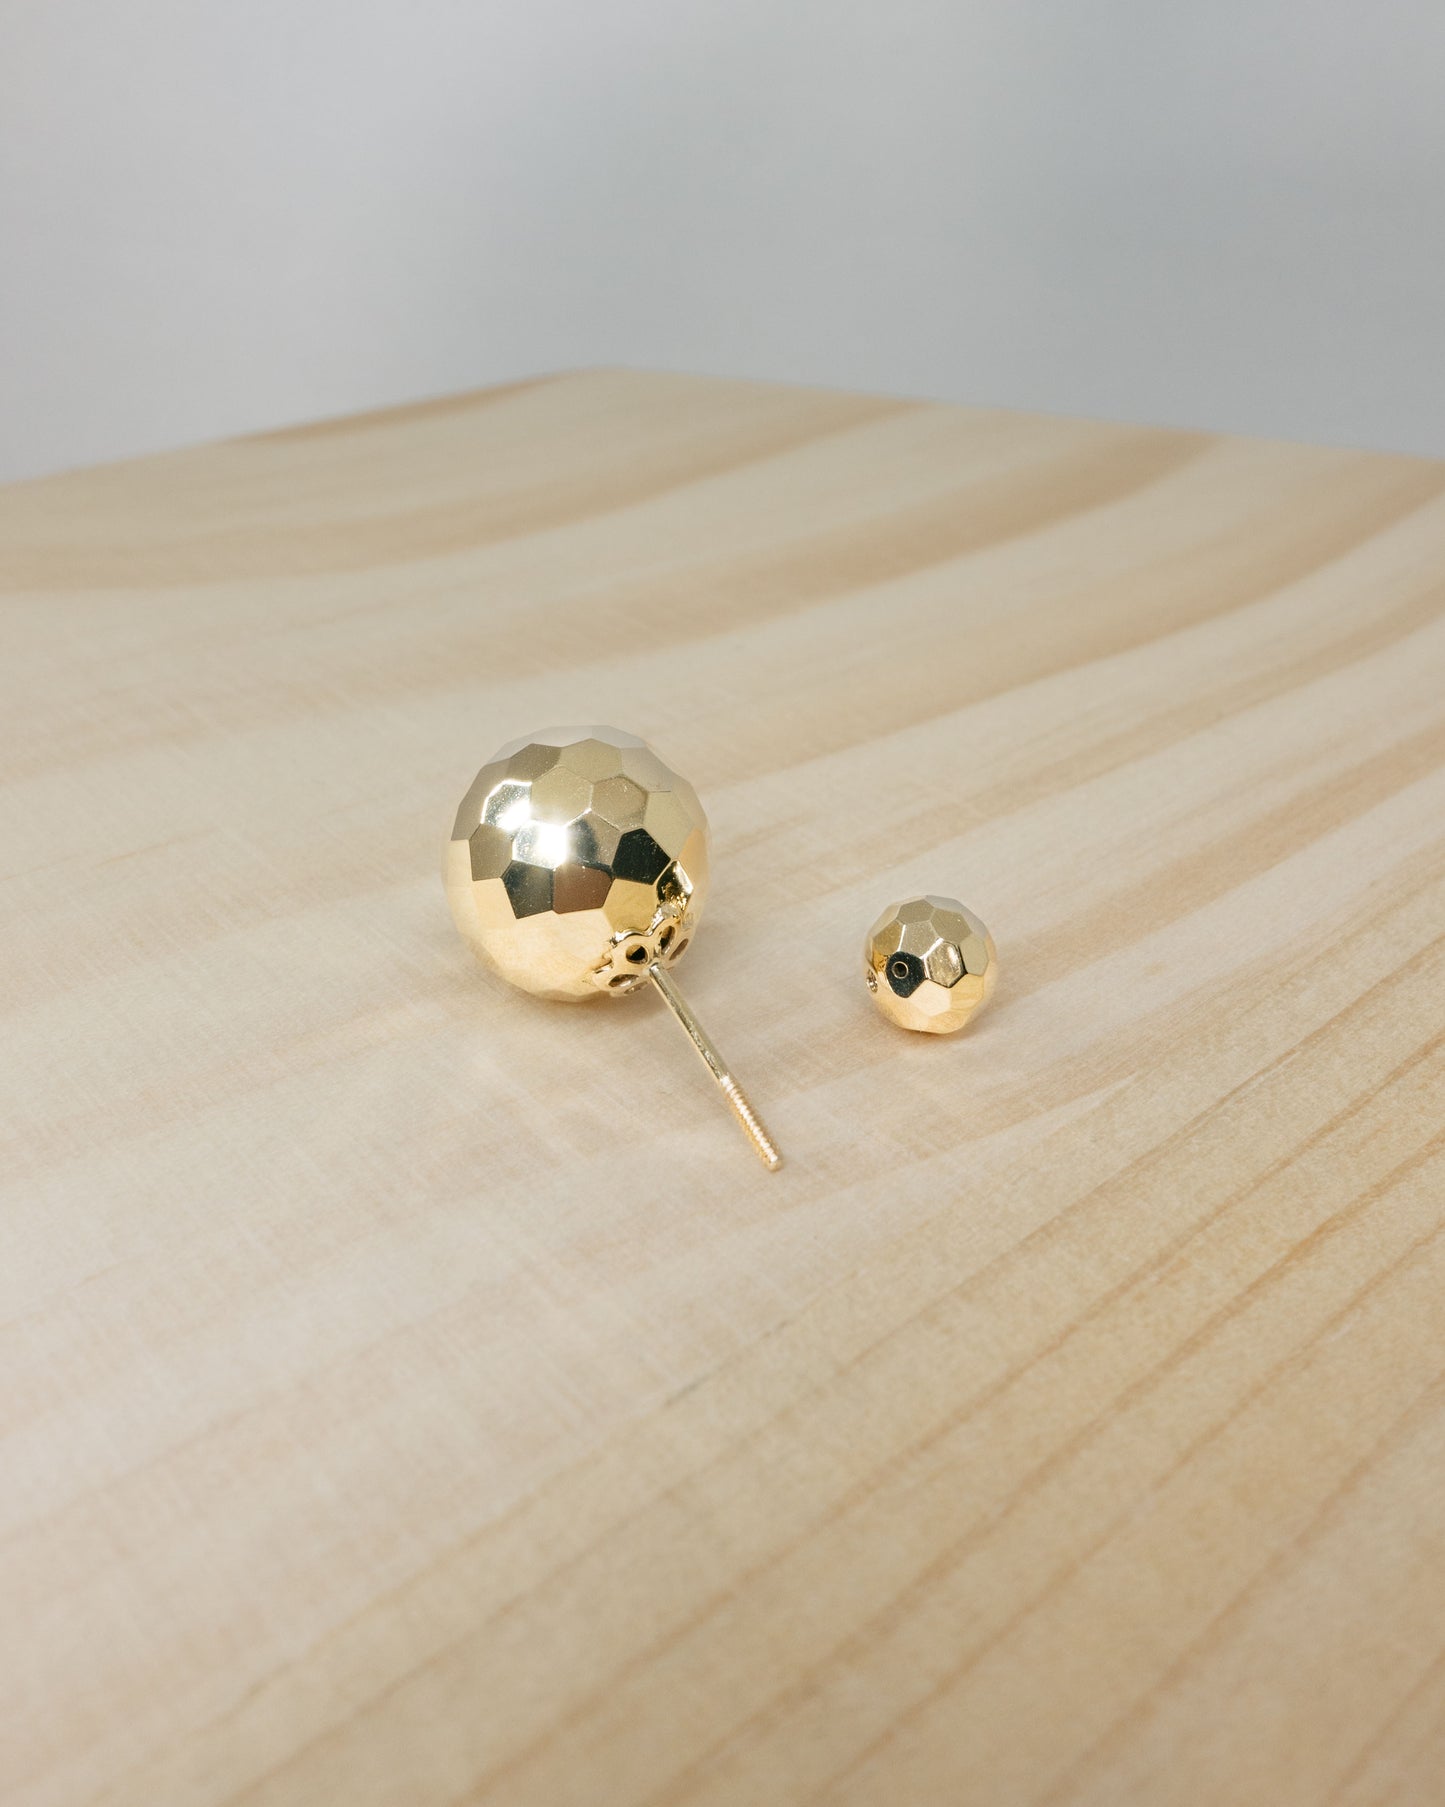 Duo Disco Ball Front Back Stud